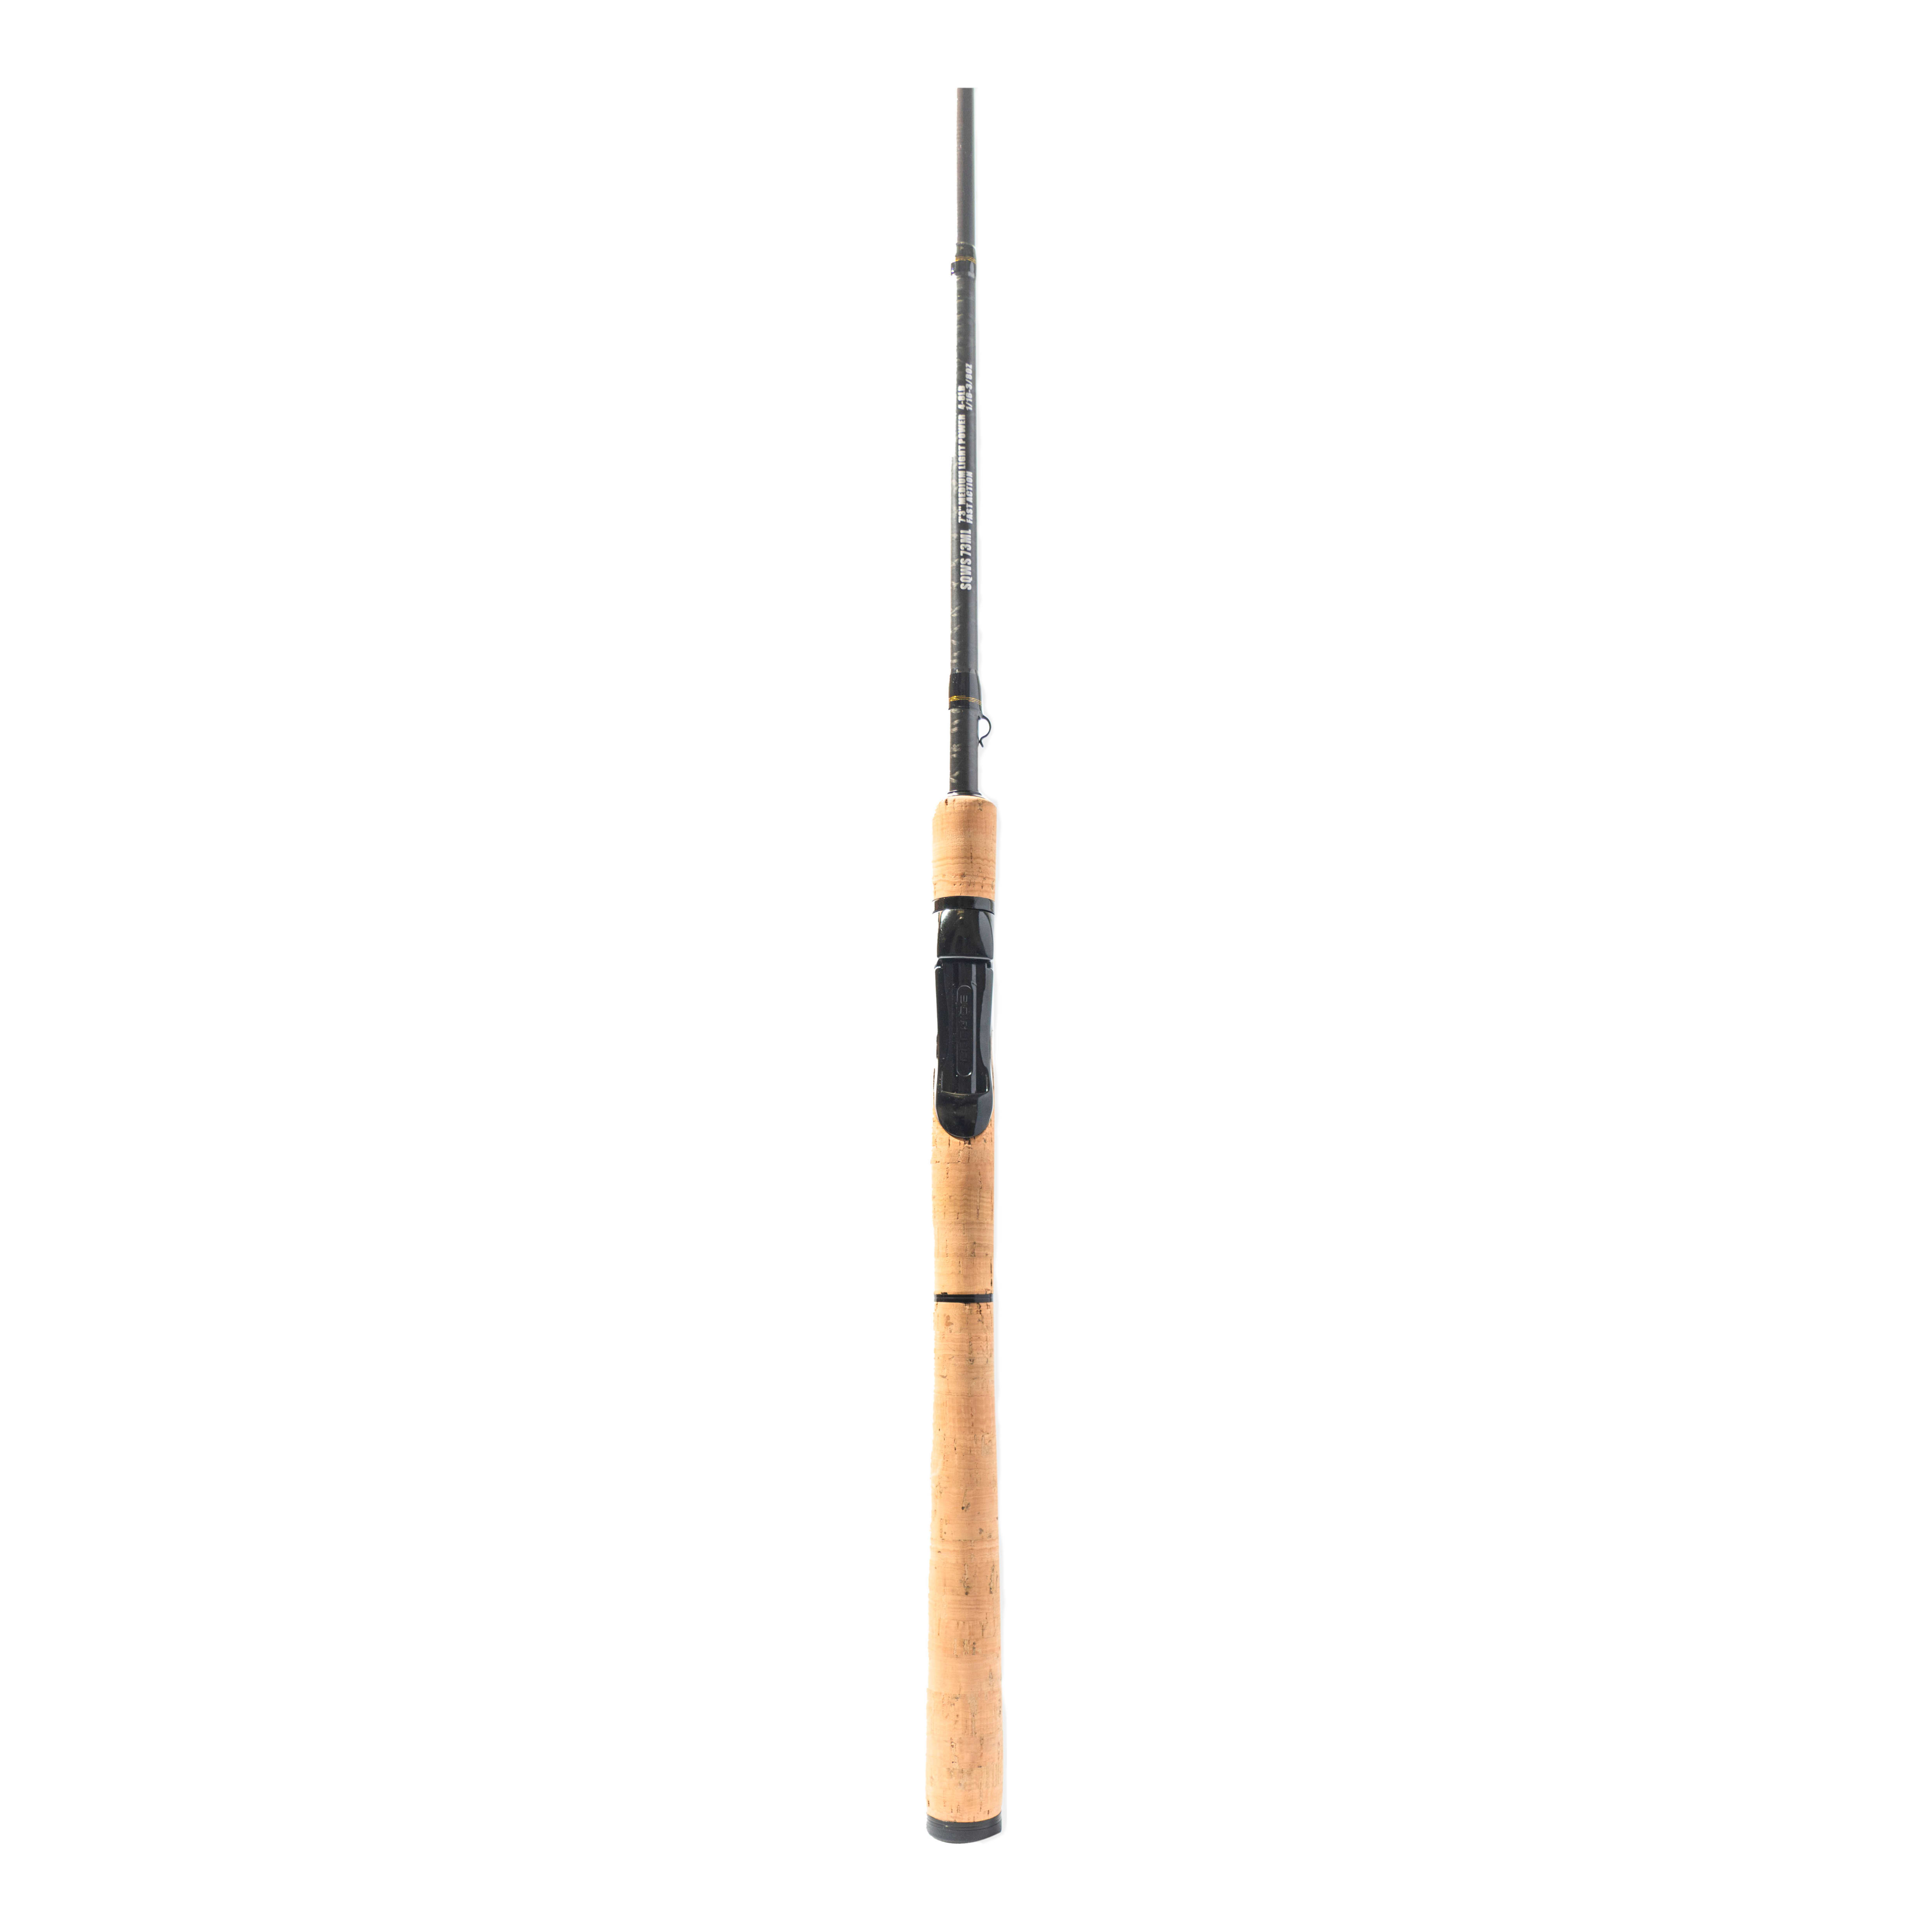 New Fenwick 6'6” HMX Spinning Fishing Rod 2 Piece Multiple Sizes Power  Action – IBBY